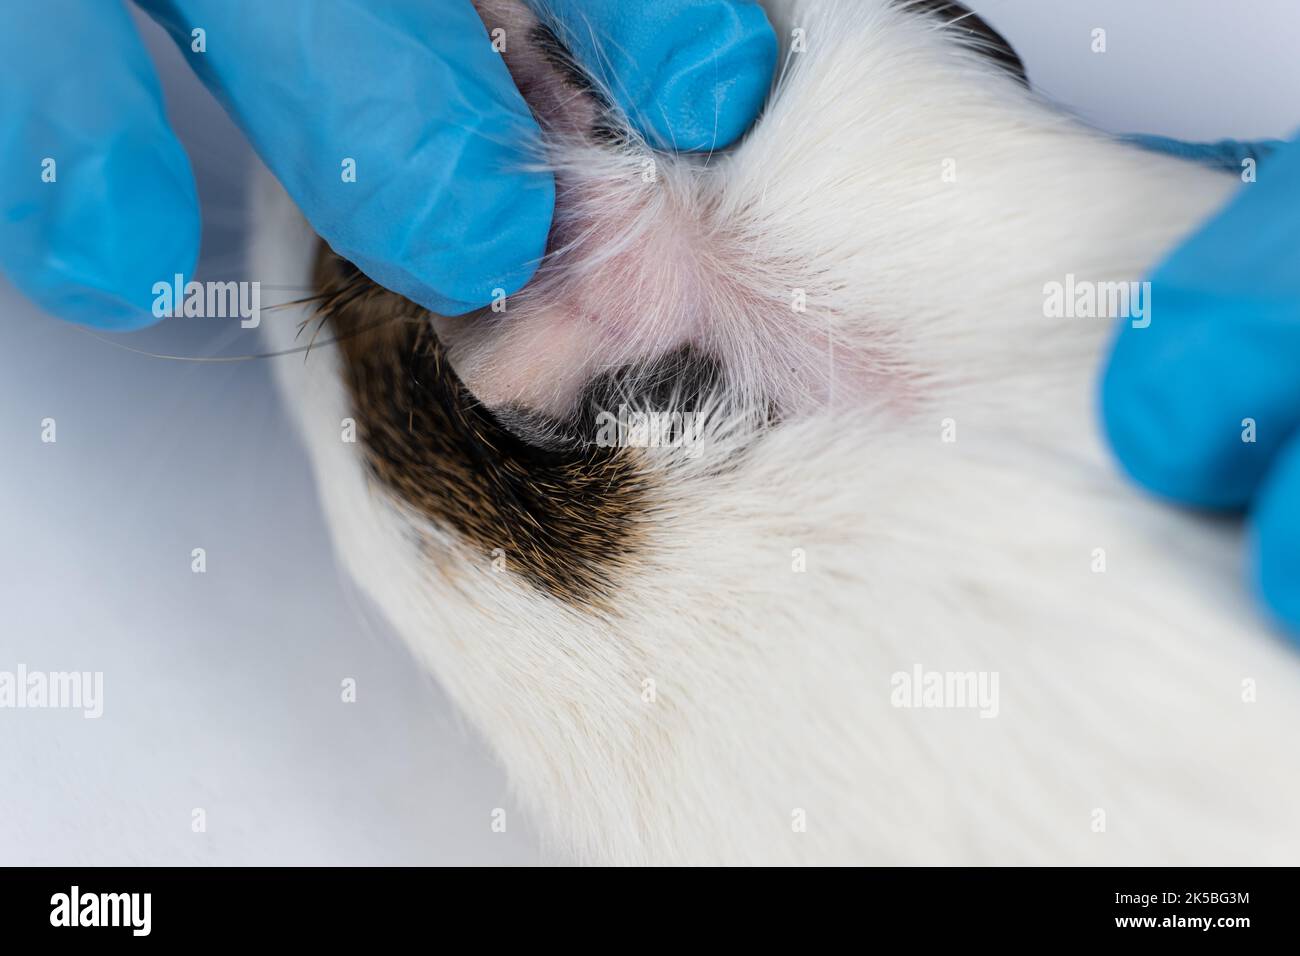 The veterinarian shows bald patches behind the ears of a small guinea pig, close-up. Stock Photo